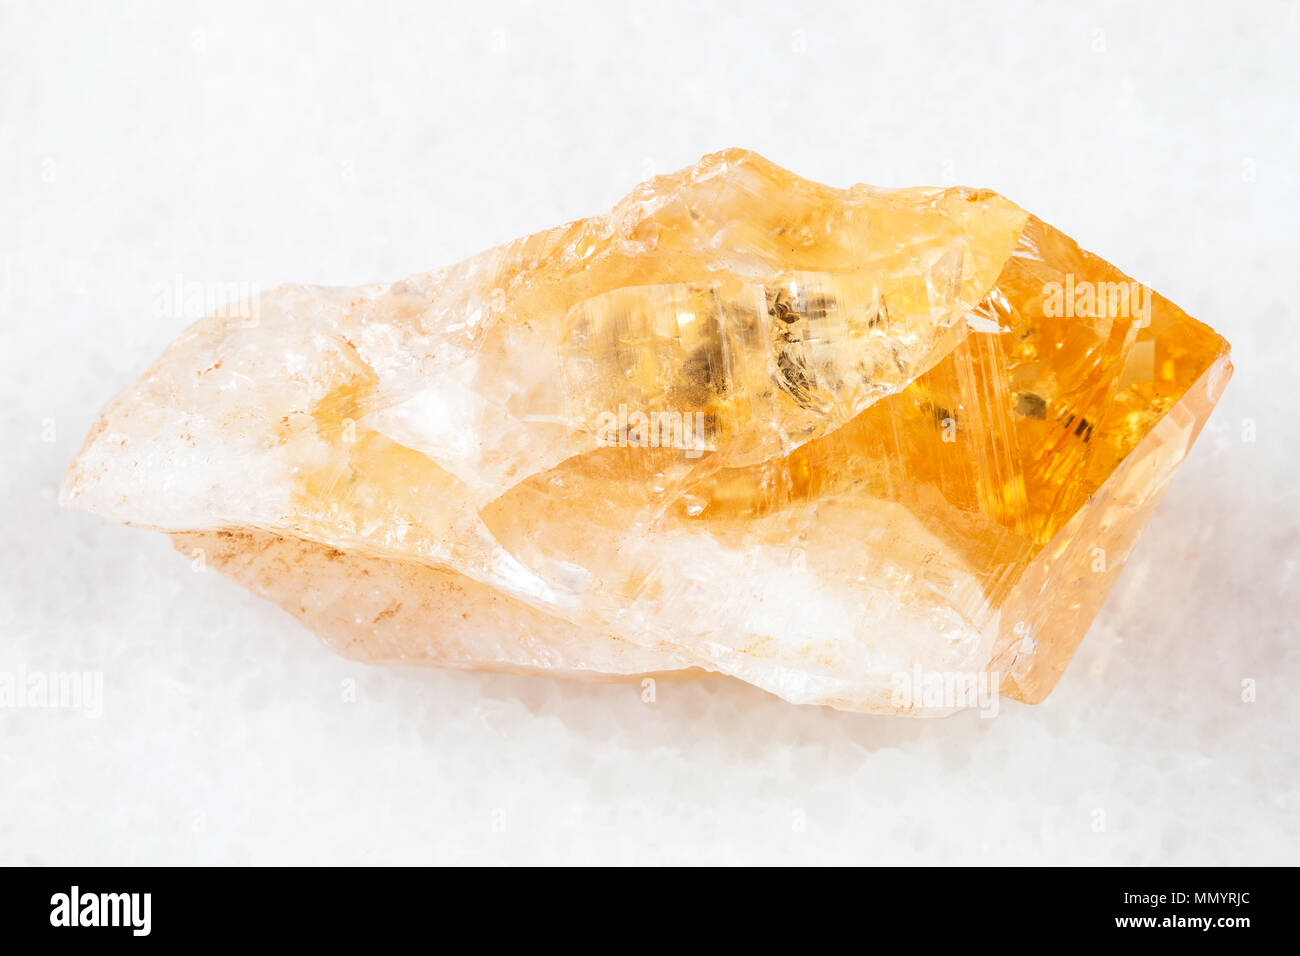 Macro Shooting Of Natural Rock Specimen Rough Crystal Of Citrine Yellow Quartz Gemstone On White Marble Background From Brazil Stock Photo Alamy